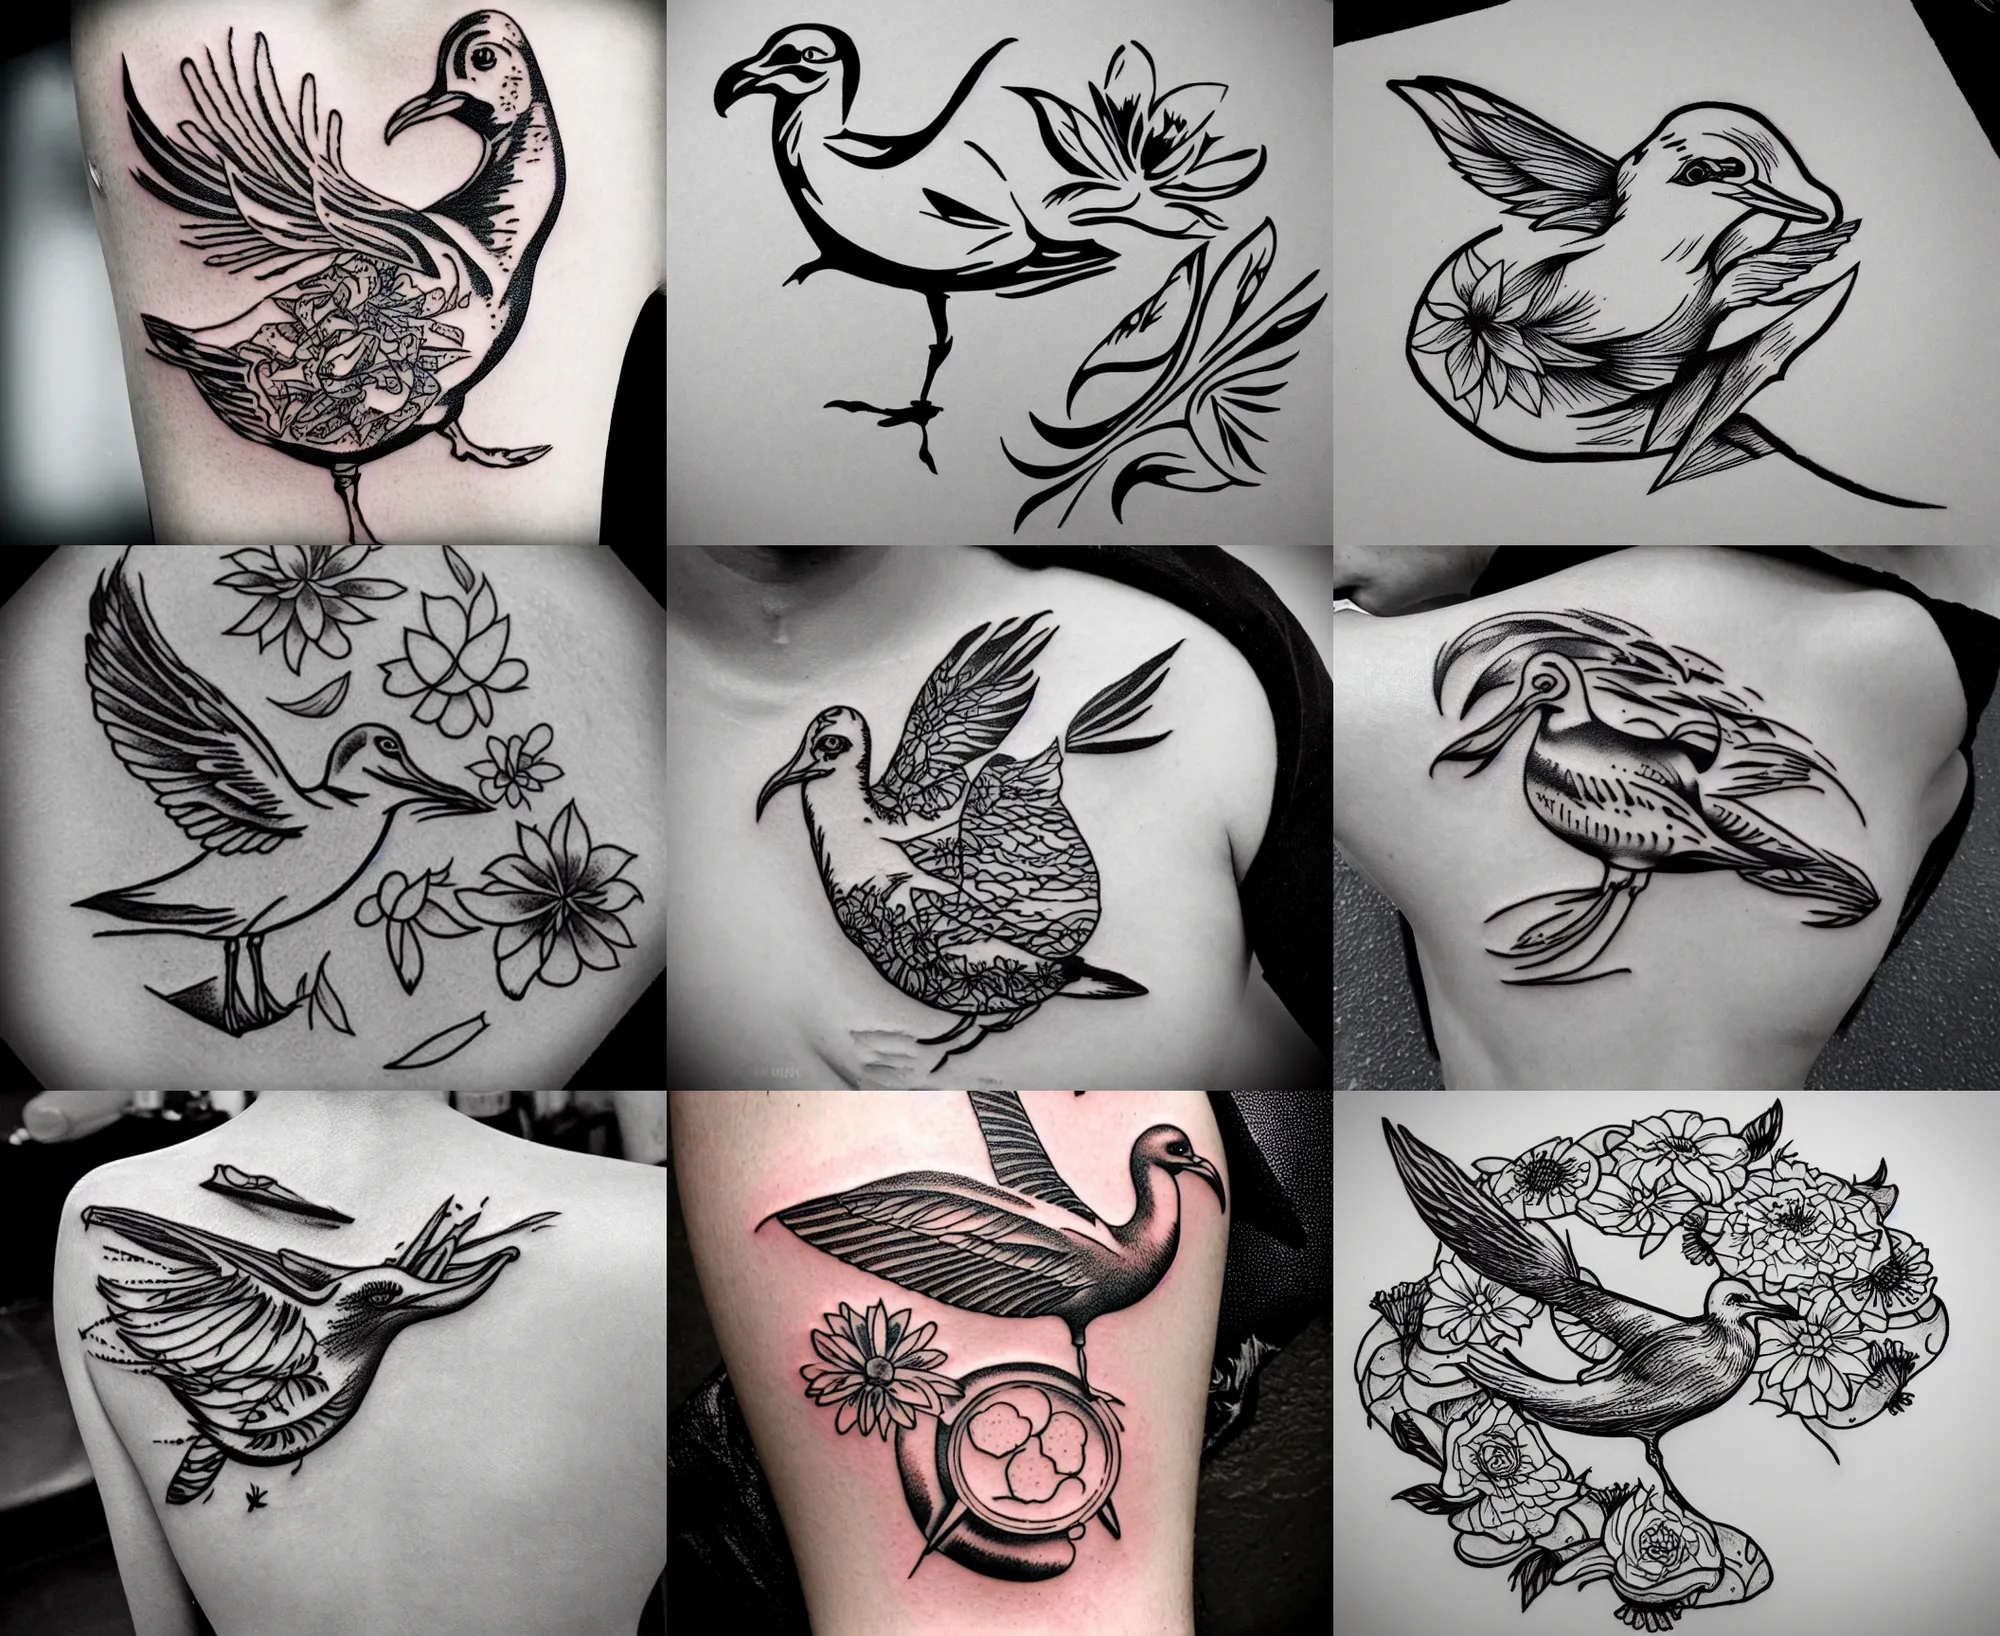 Flying Seagull Tattoo Ideas & Their Meaning - TattooGlee | Seagull tattoo,  Turtle tattoo designs, Tattoos